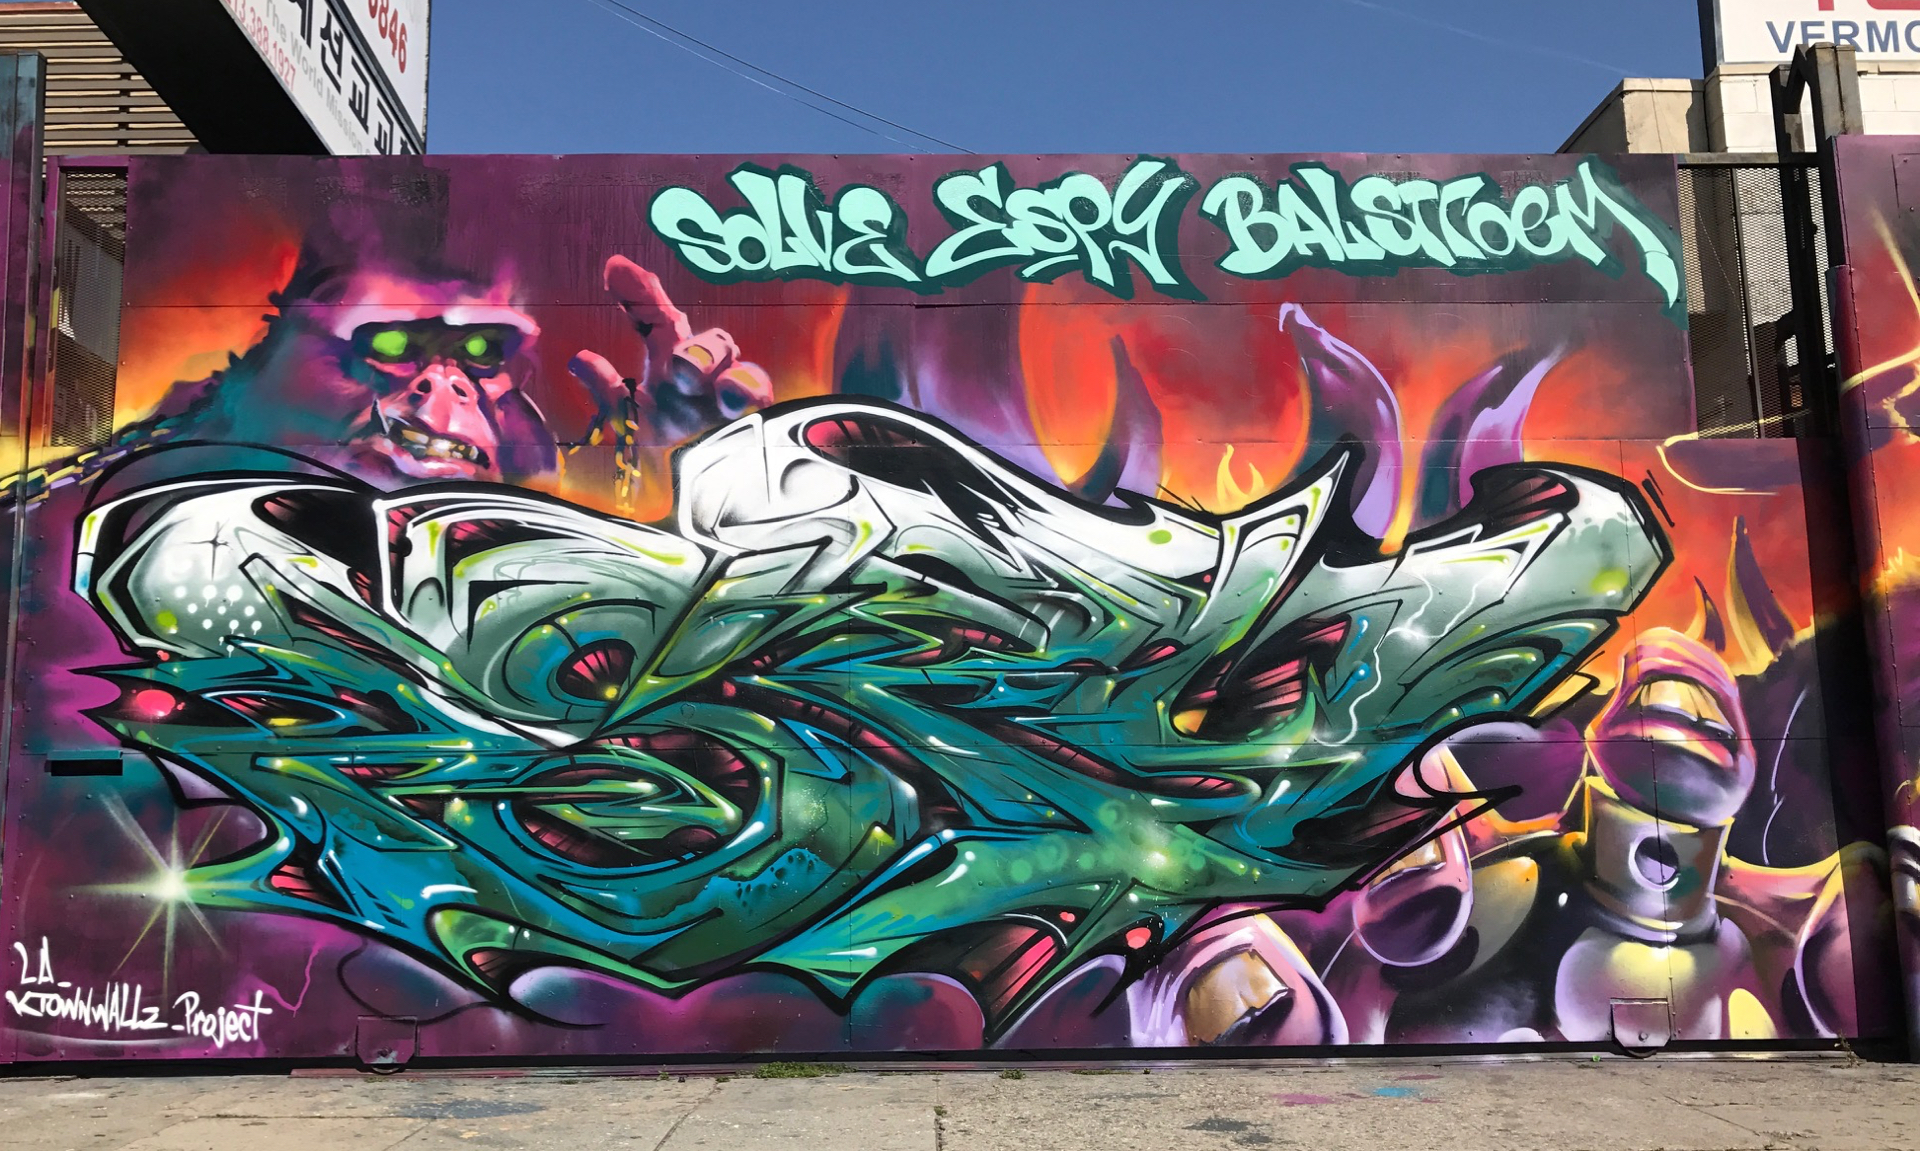 Espy: my graffiti experience from New Jersey to L.A. | Throw Up